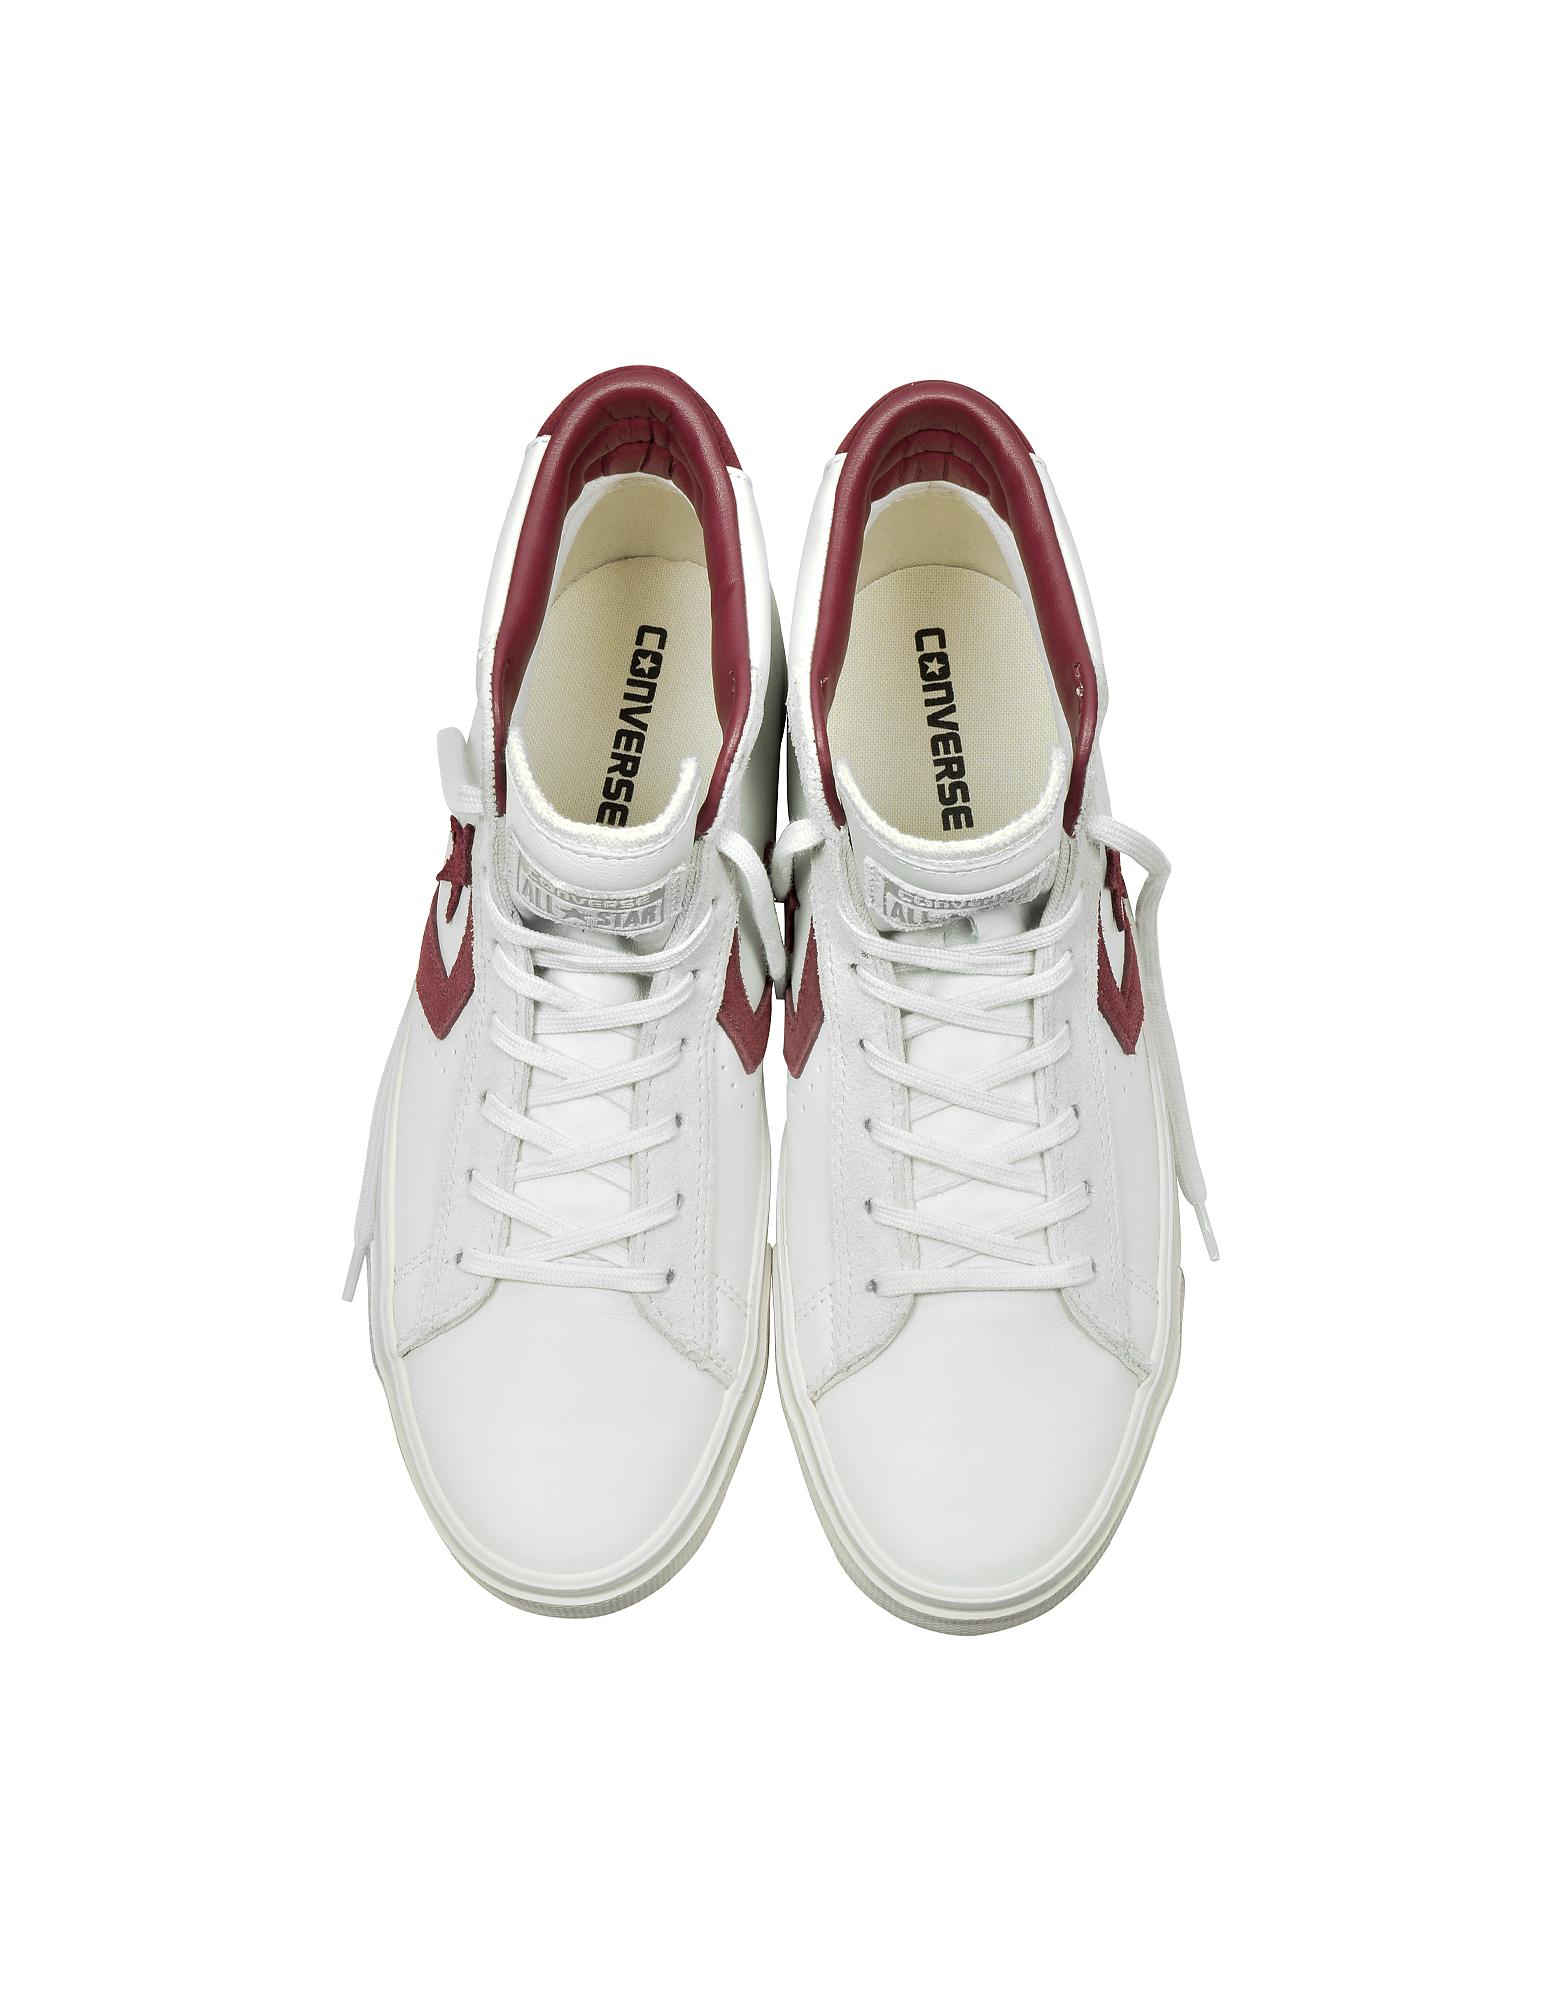 Converse Pro Leather Vulc Mid Distressed White Leather And Burgundy Suede  Sneakers for Men - Lyst